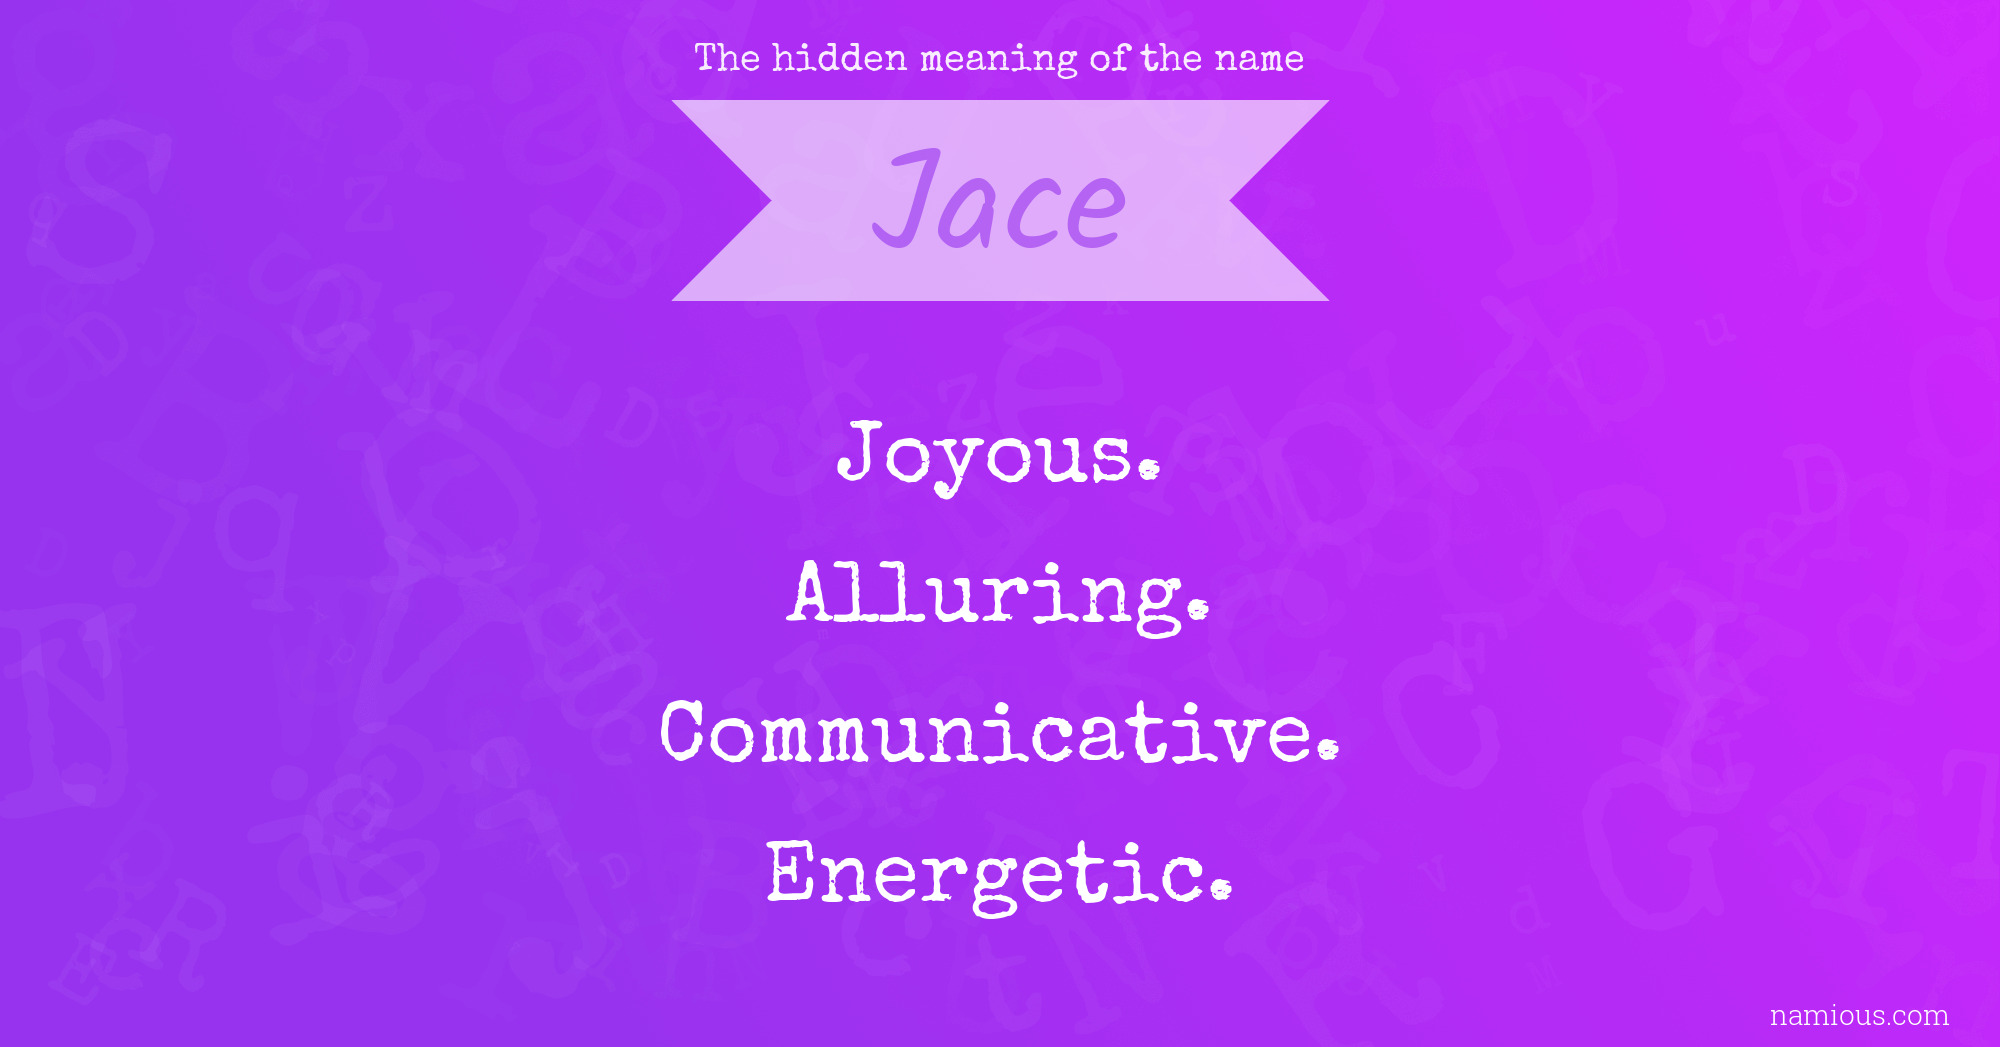 The hidden meaning of the name Jace